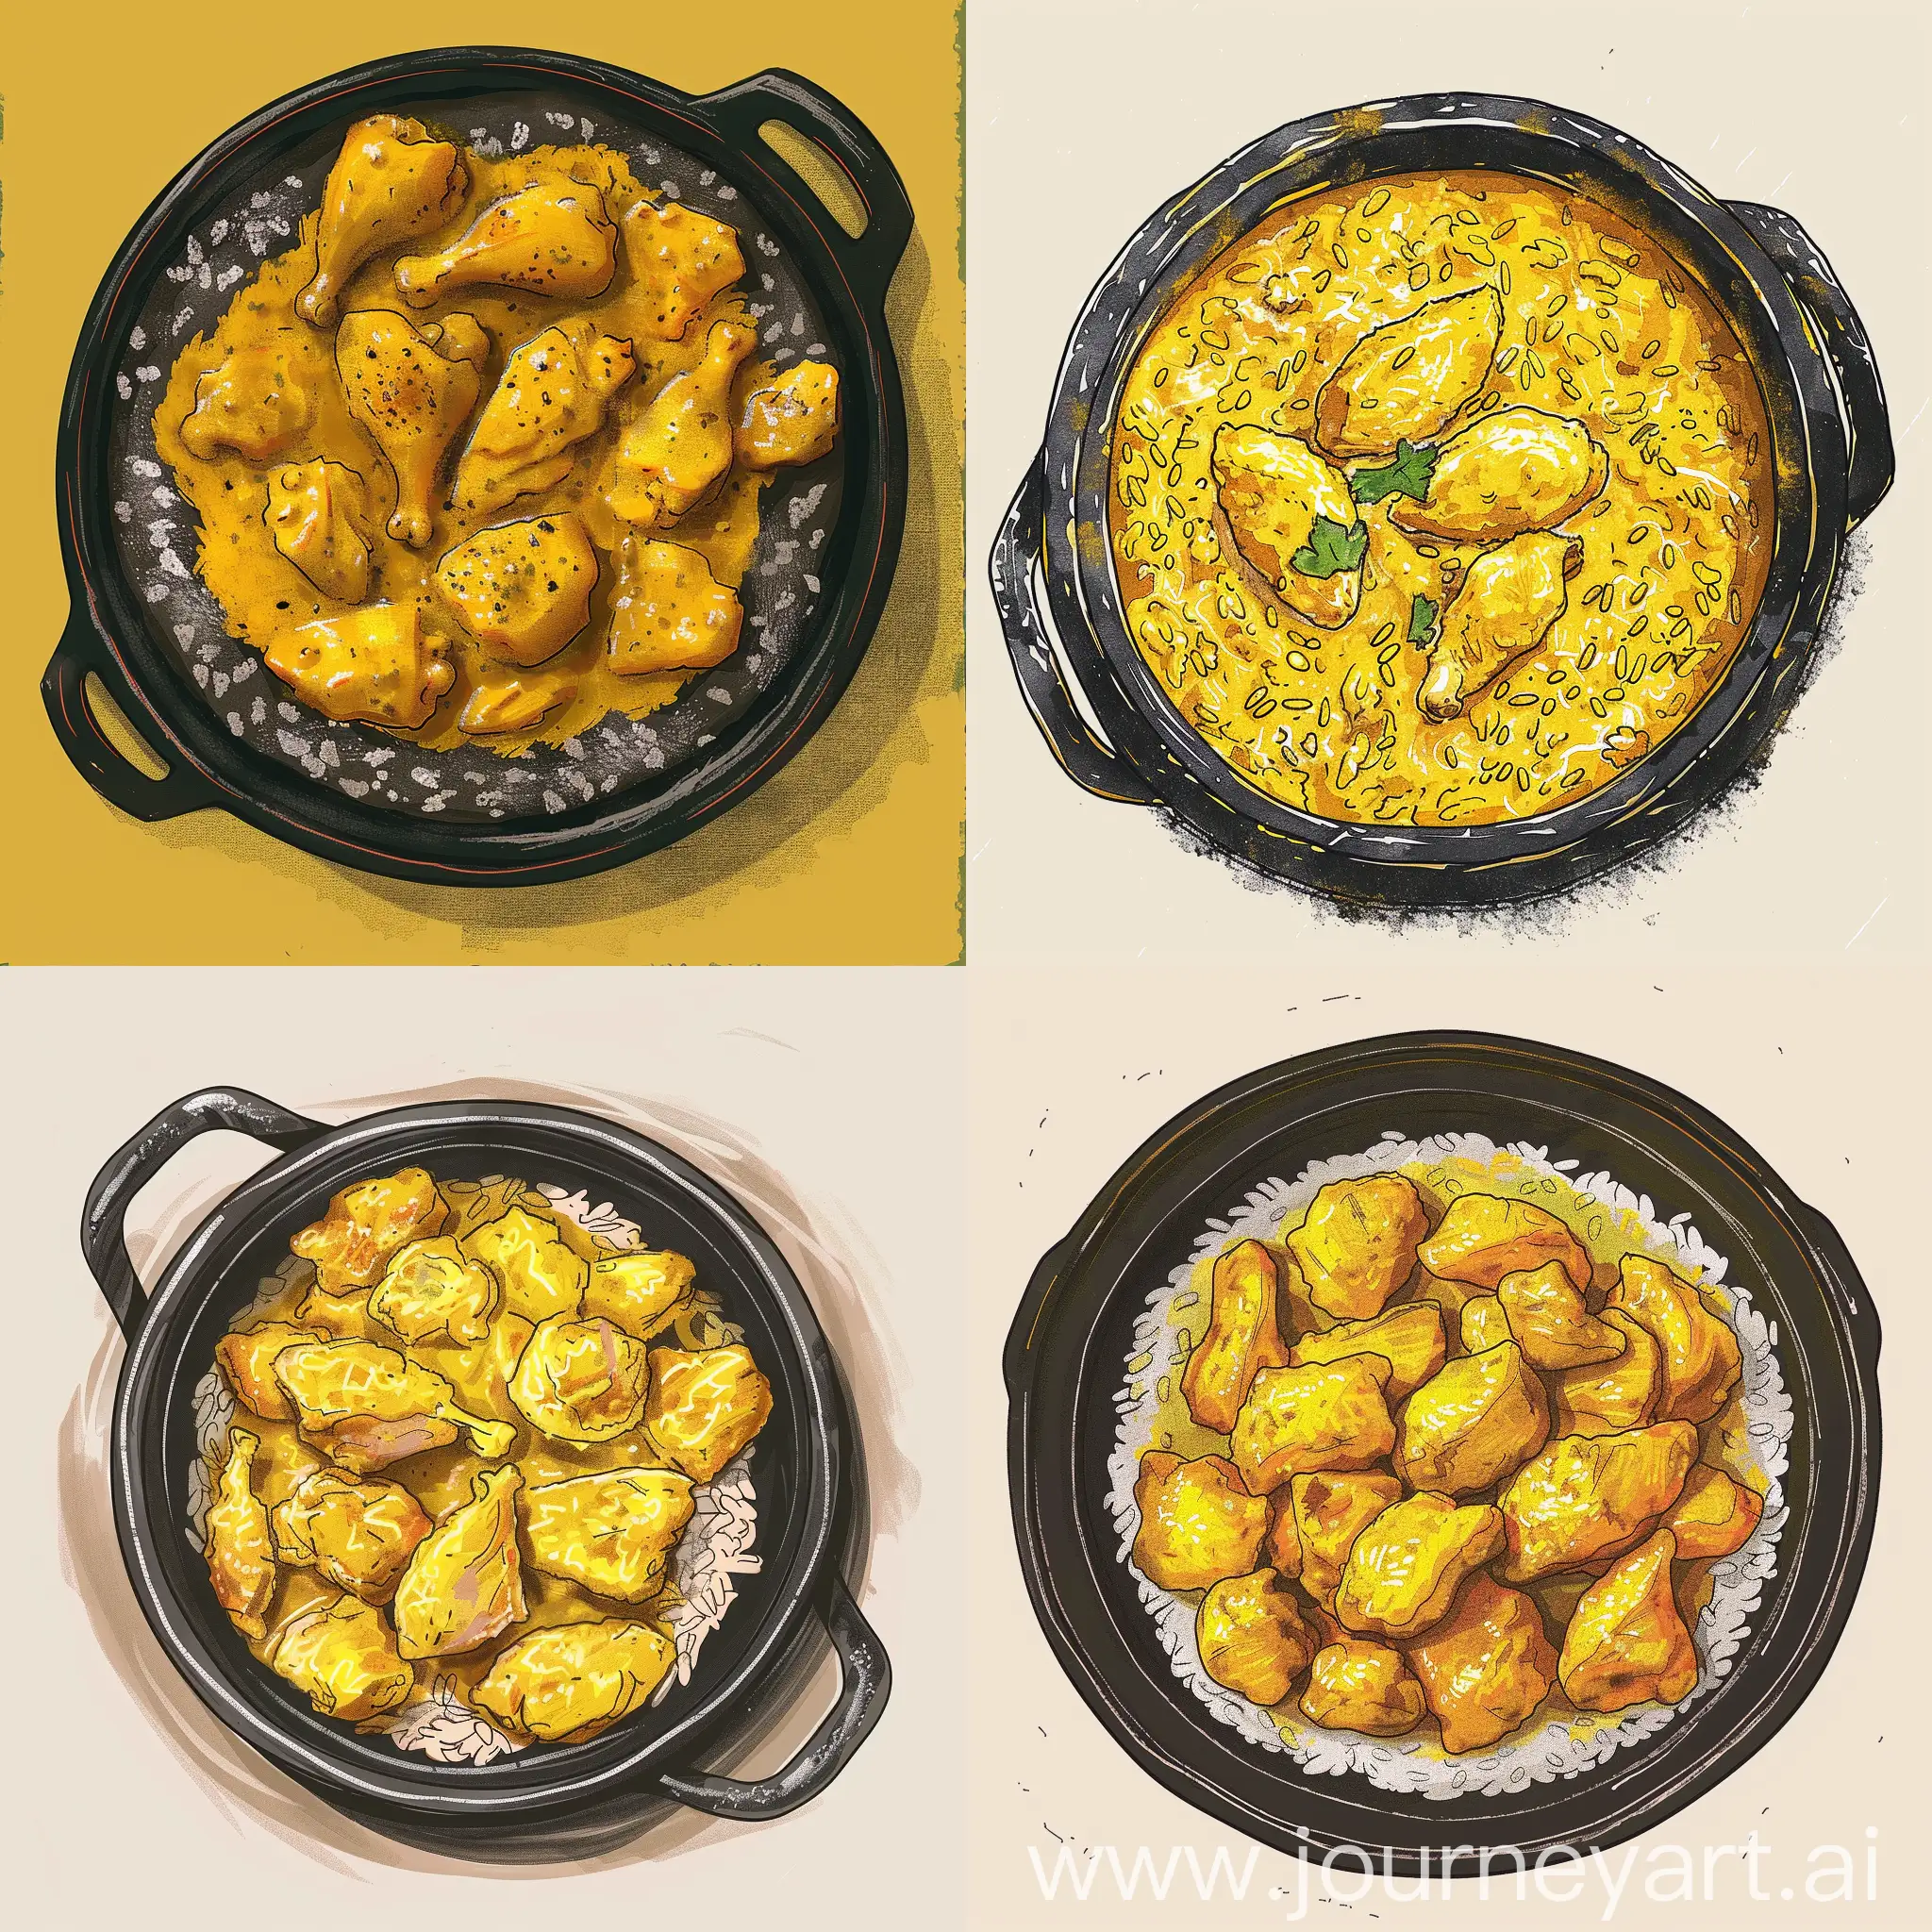 HandDrawn-Animated-Yellow-Stewed-Chicken-and-Rice-in-Black-Sand-Pot-from-Above